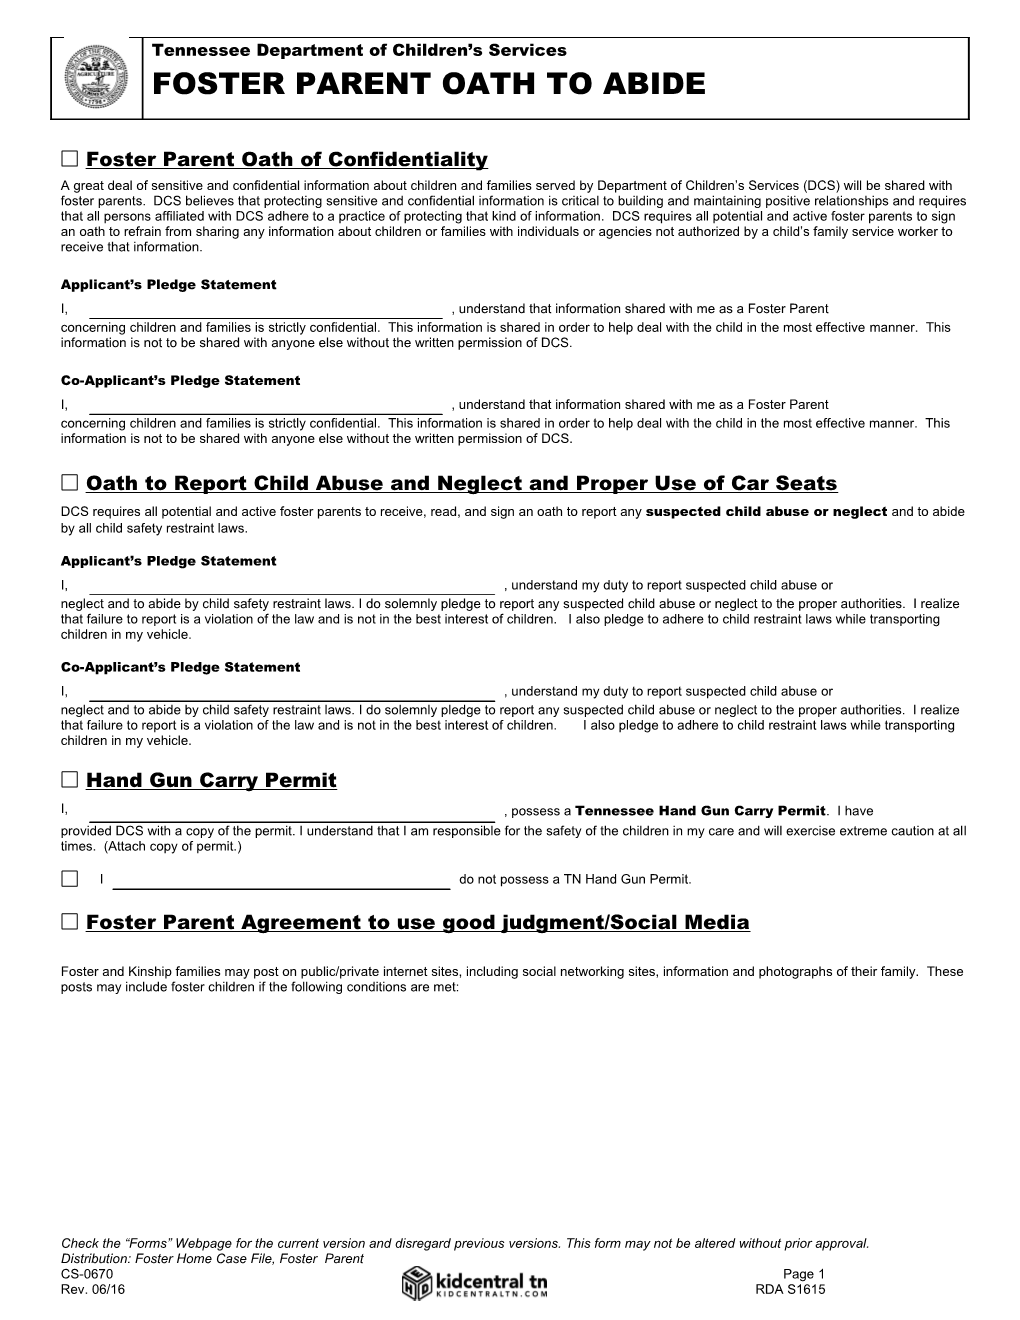 Foster Parent Oath of Confidentiality